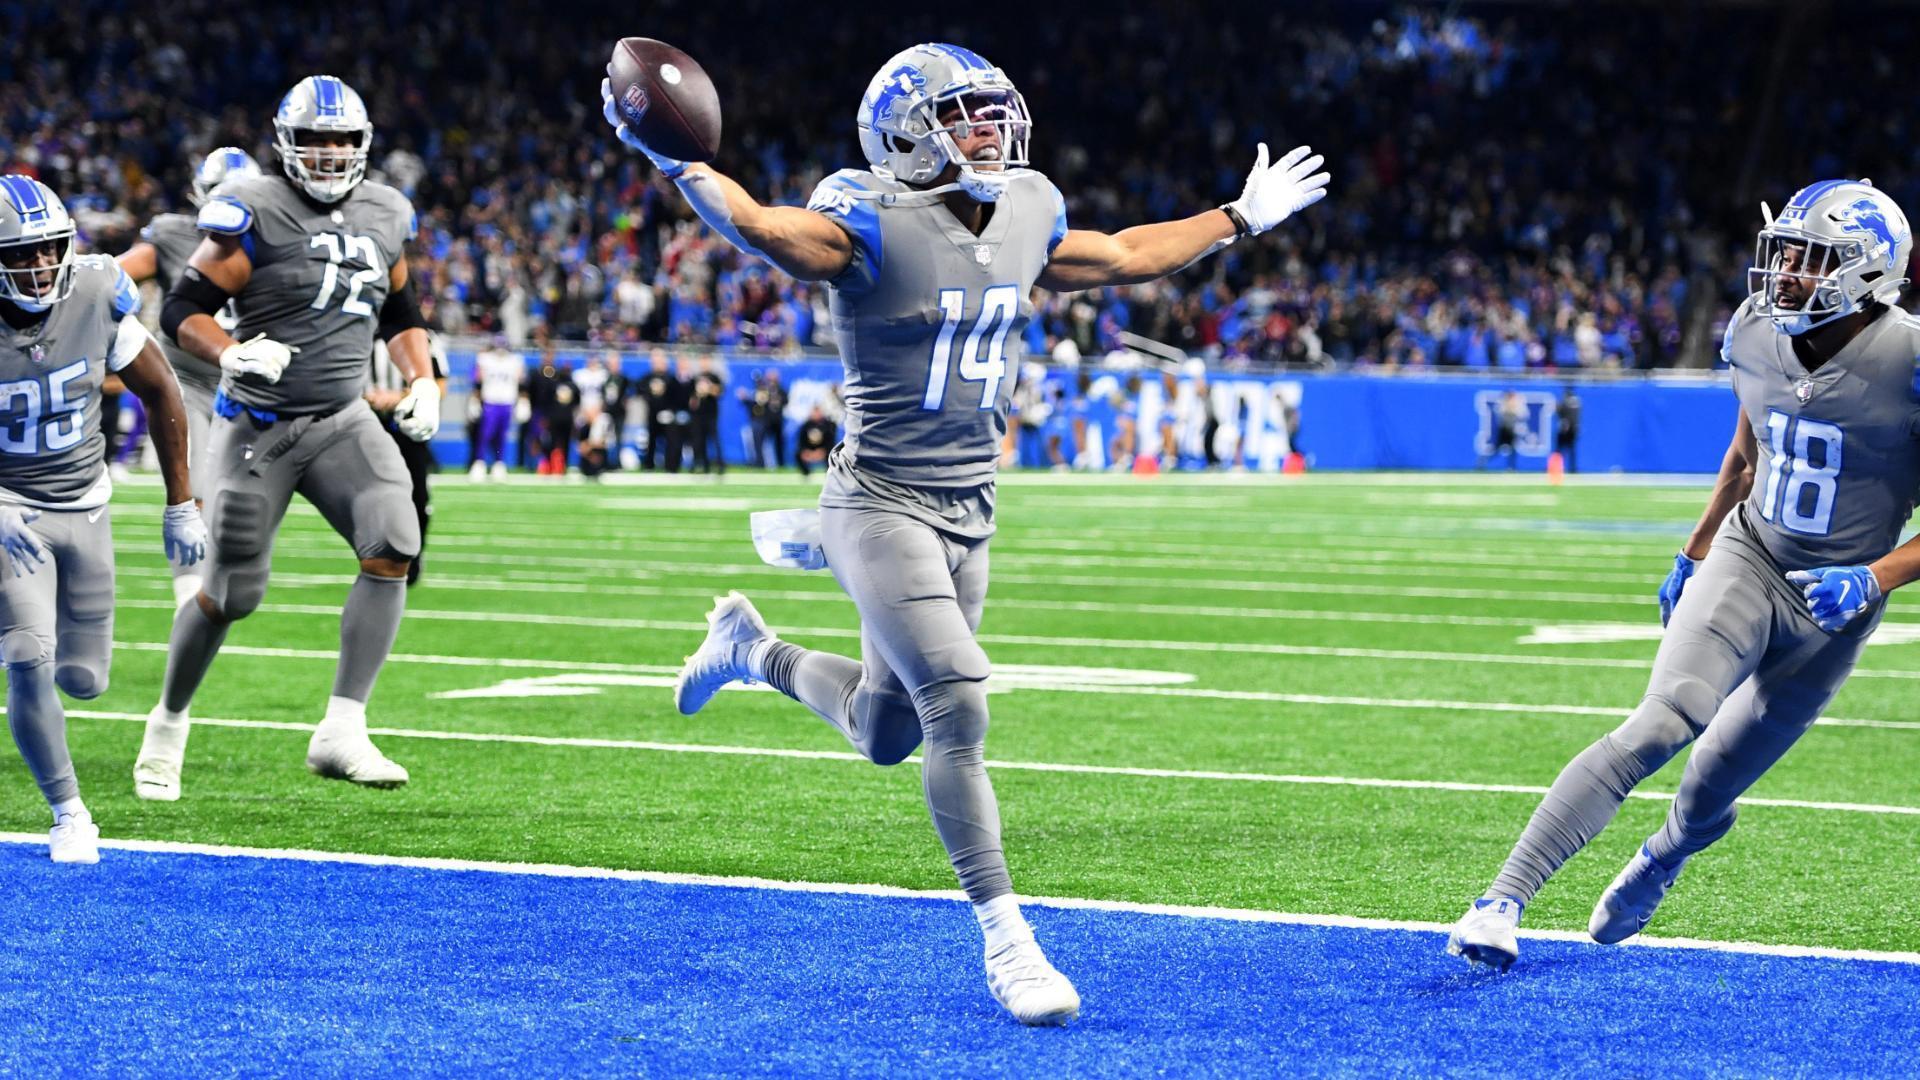 Lions stun Vikings on final play to win first game of season